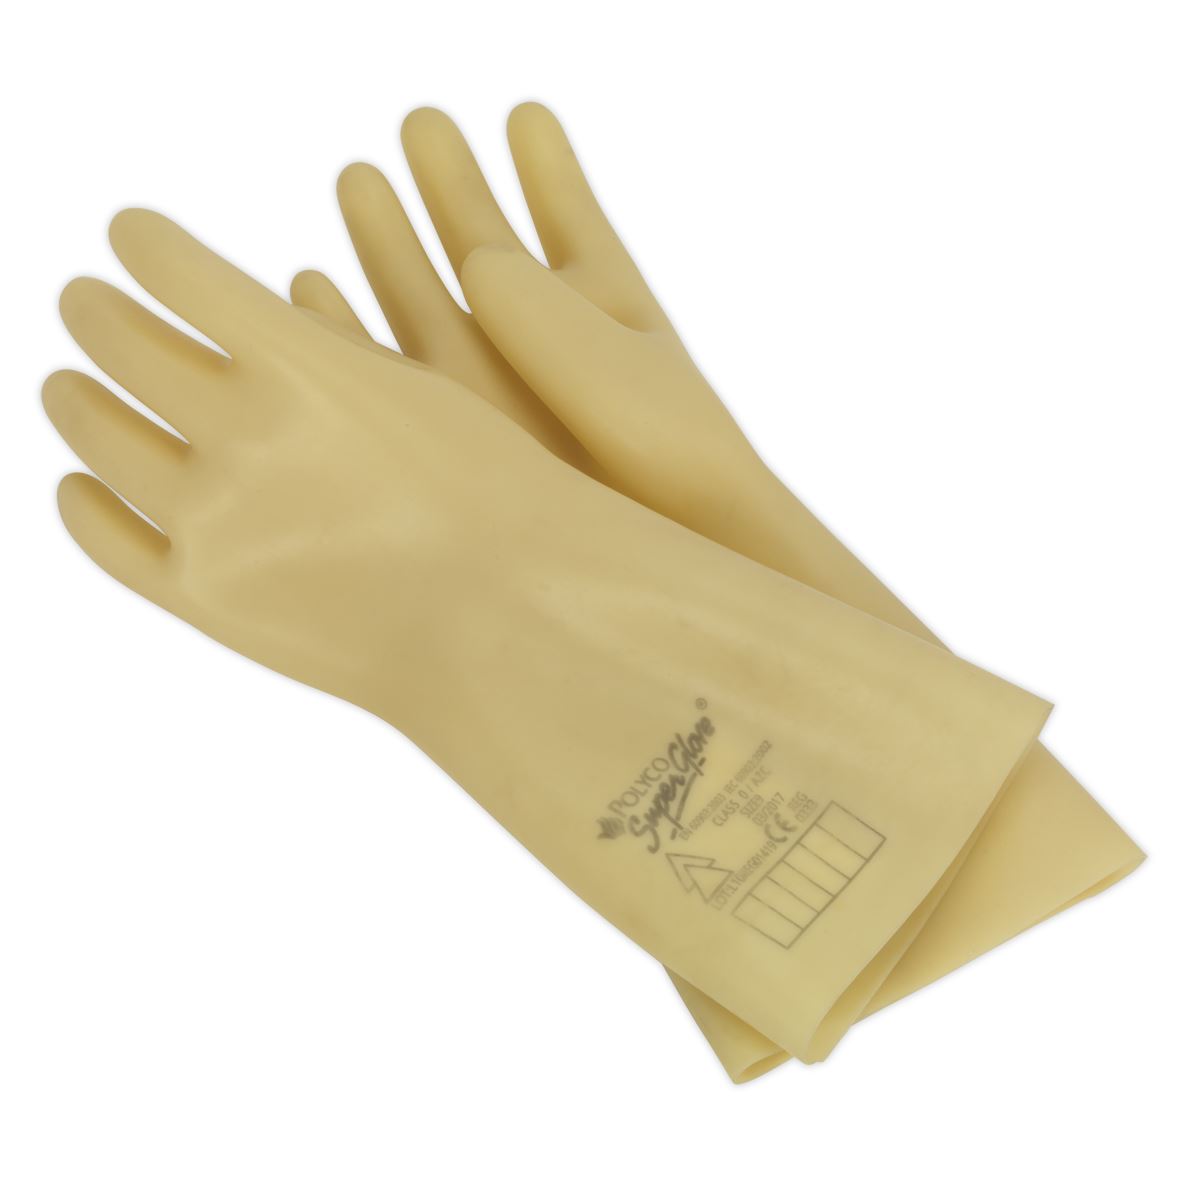 Sealey Electrician's Safety Gloves 1kV - Pair